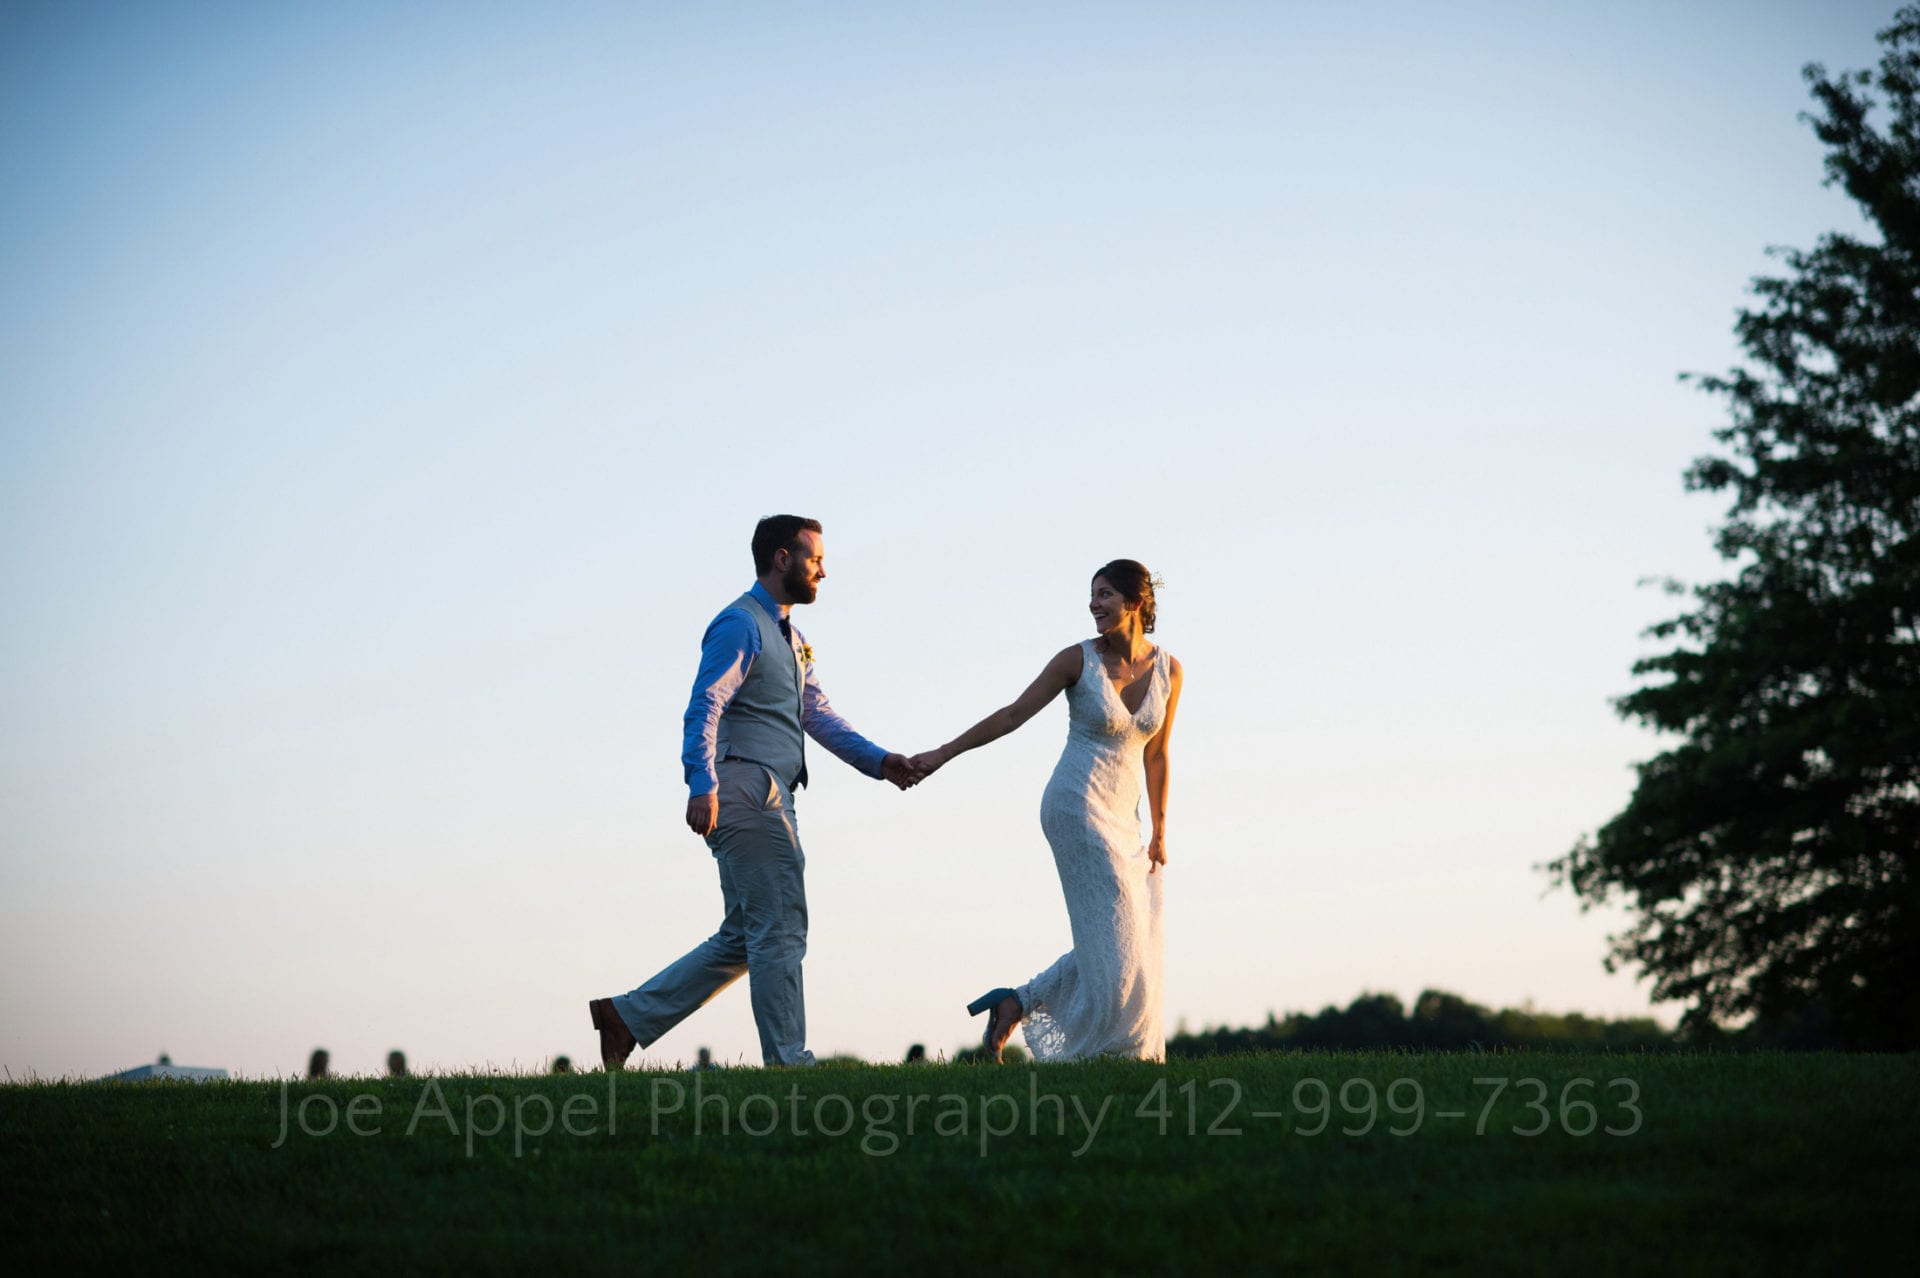 A bride looks back at her groom as she leads him across the top of a hill with blue twilight skies behind them. Armstrong Farms Weddings